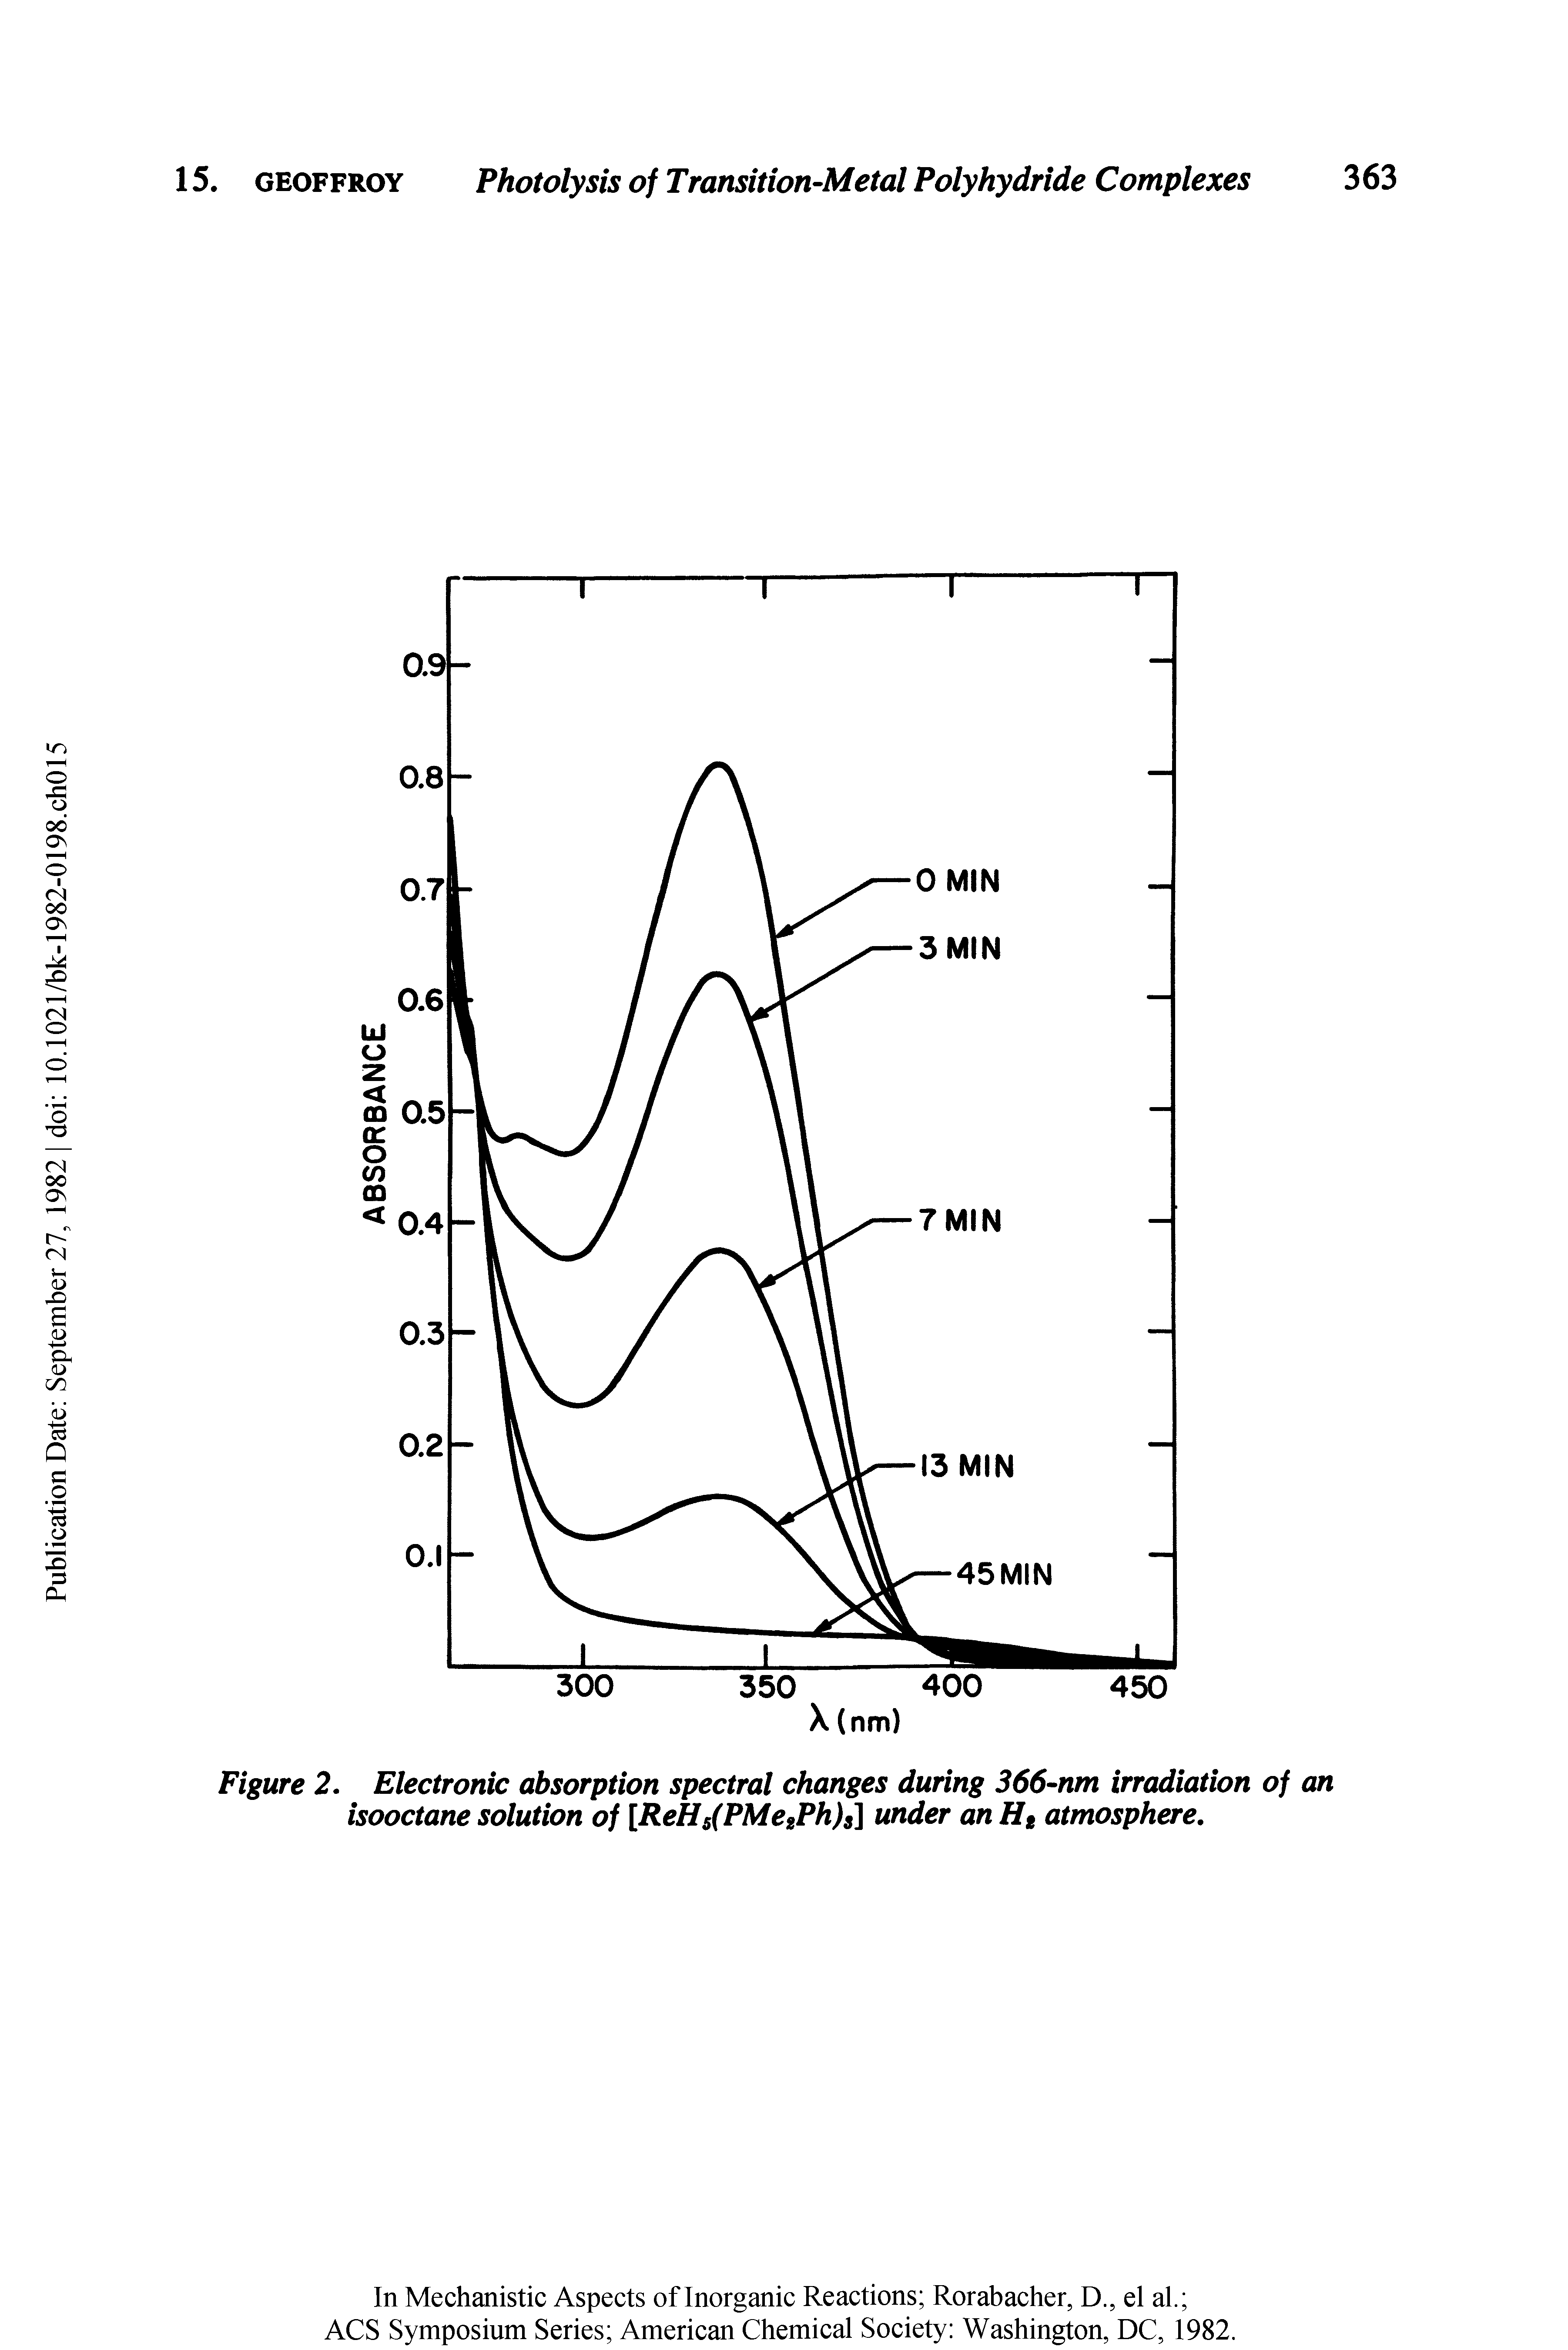 Figure 2. Electronic absorption spectral changes during 366-nm irradiation of an isooctane solution of [ReH5(PMe2Ph)s] under an Ht atmosphere.